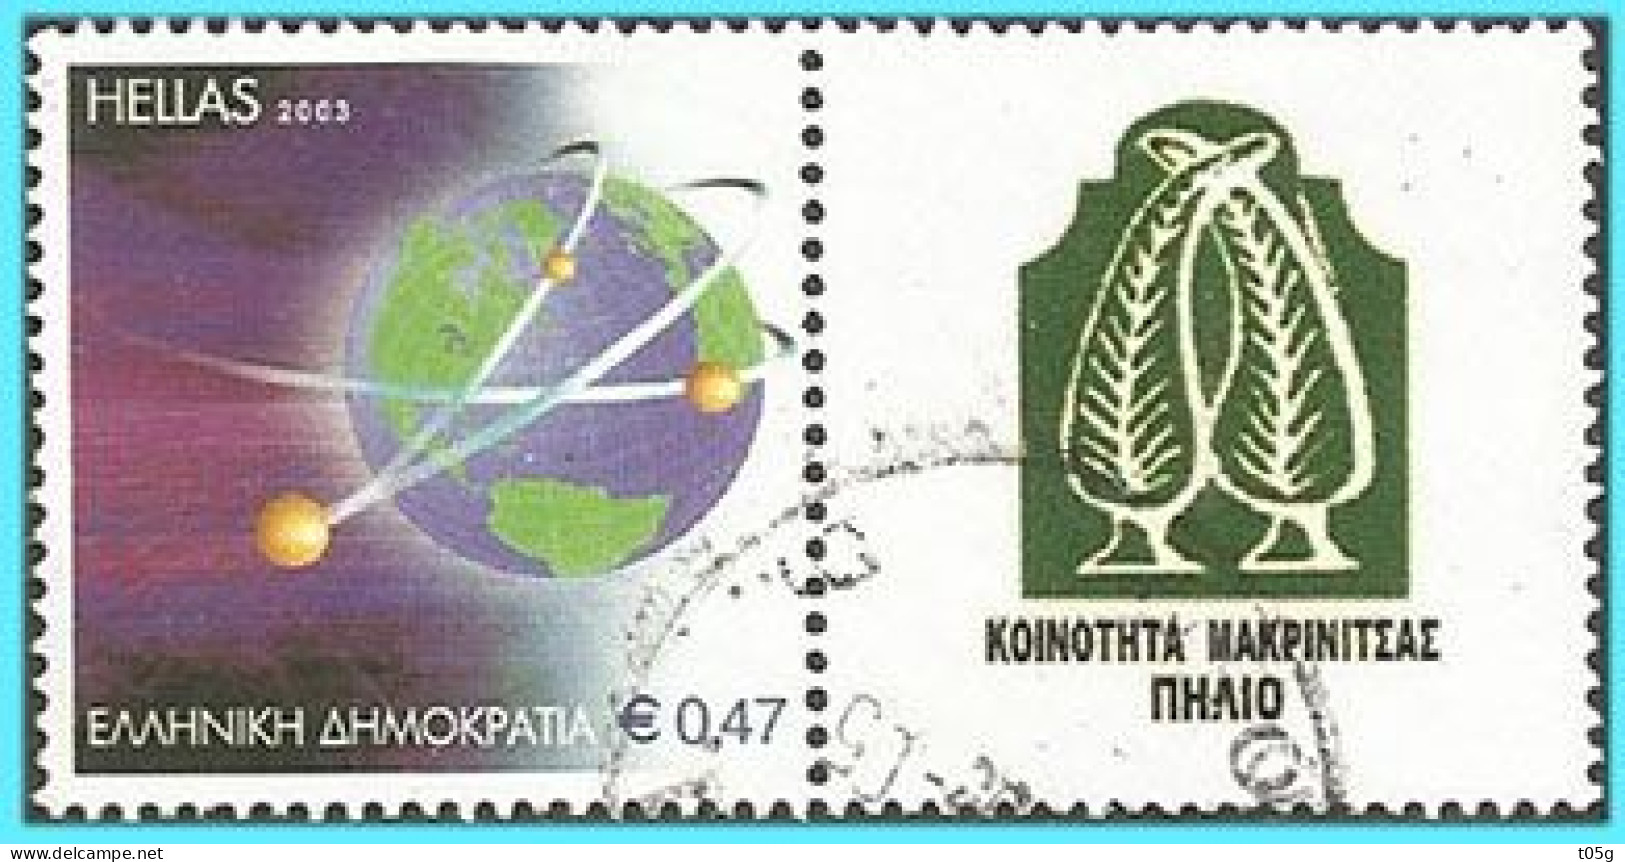 GREECE- GRECE- HELLAS 2001: Personalised Stamps Of Municipality Makrinitsas-Pilio Used - Used Stamps